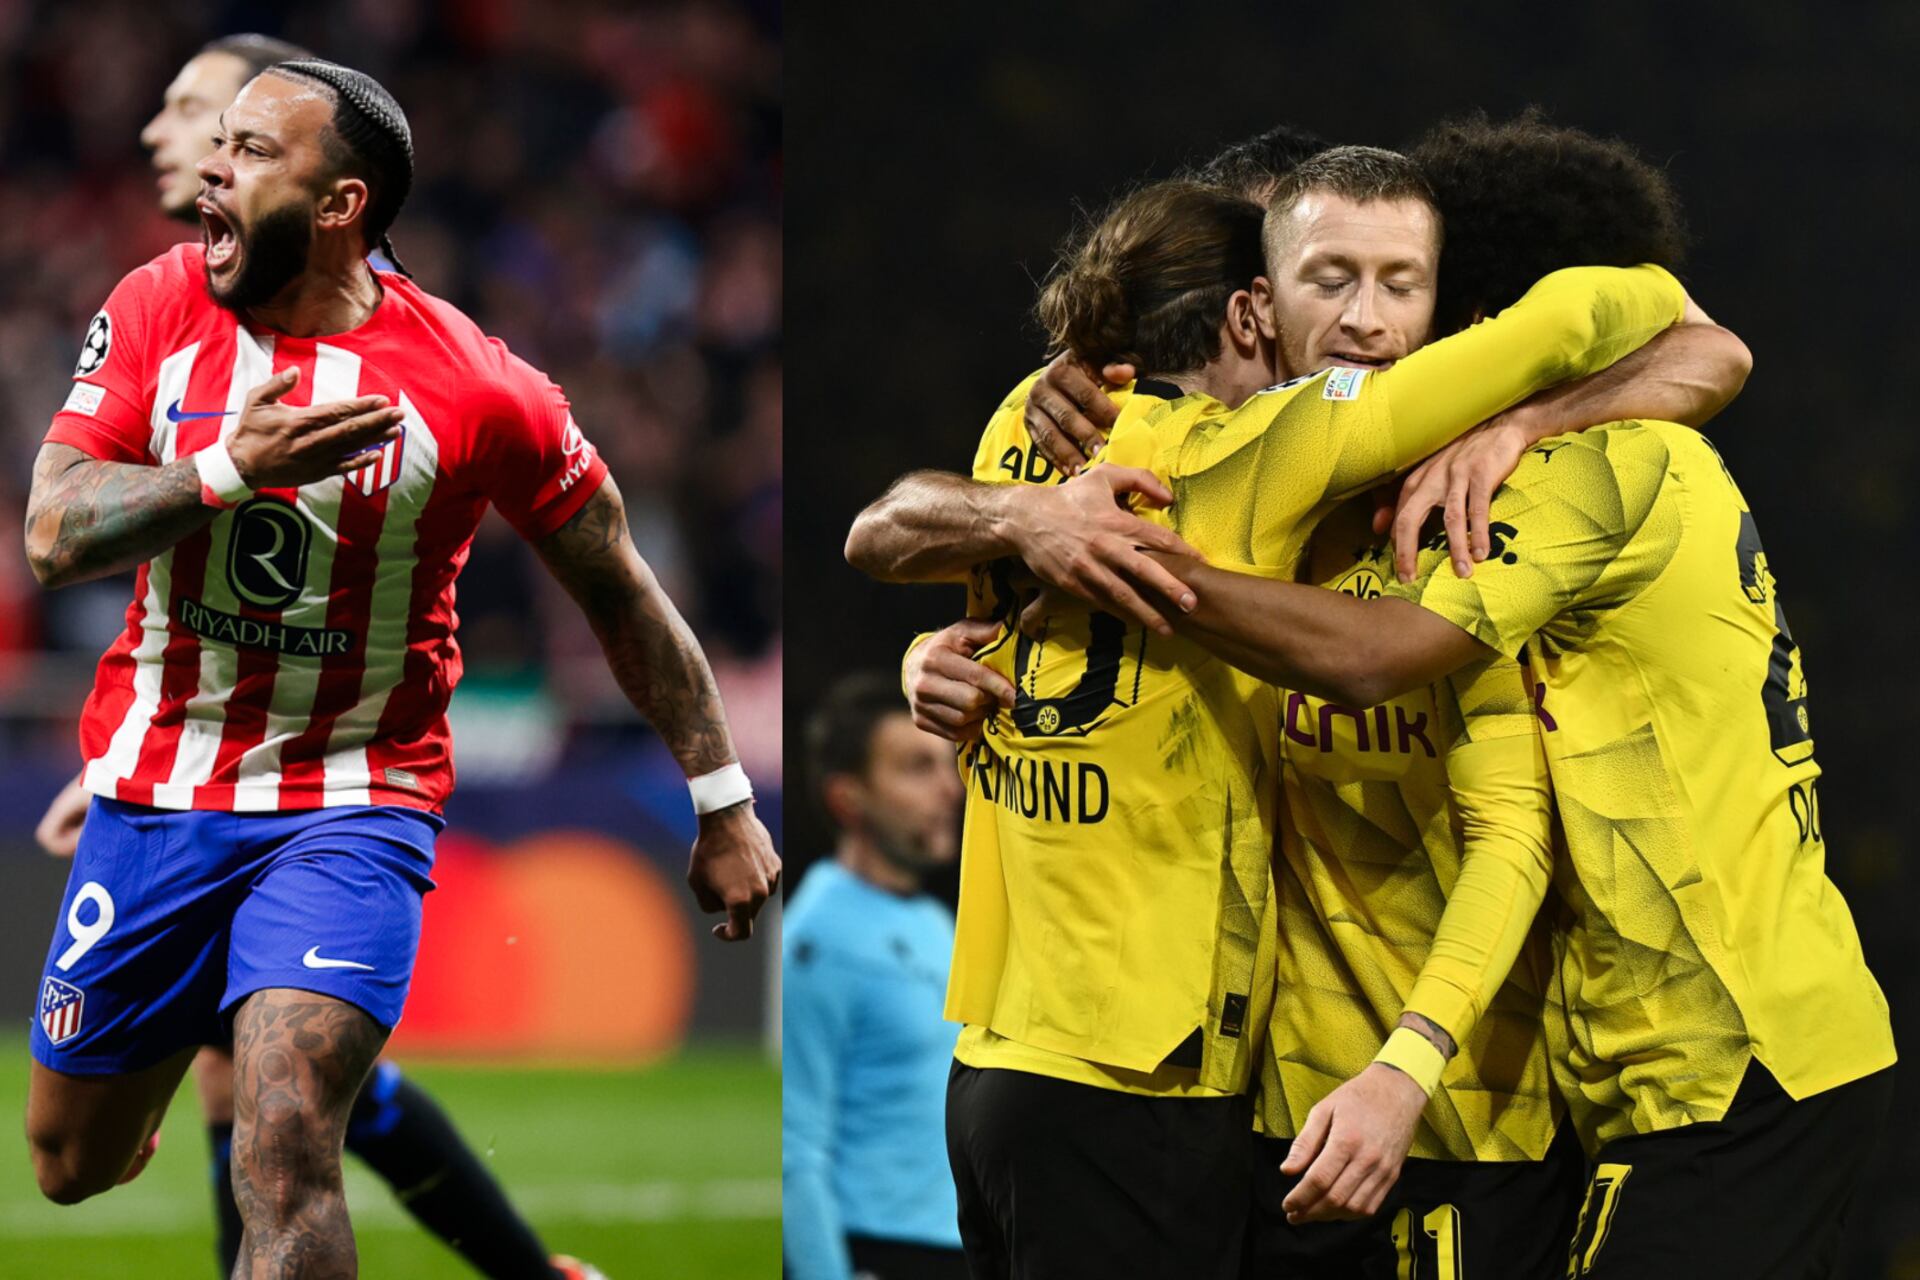 Atletico Madrid and Dortmund advance to the QF, here are all the qualified teams